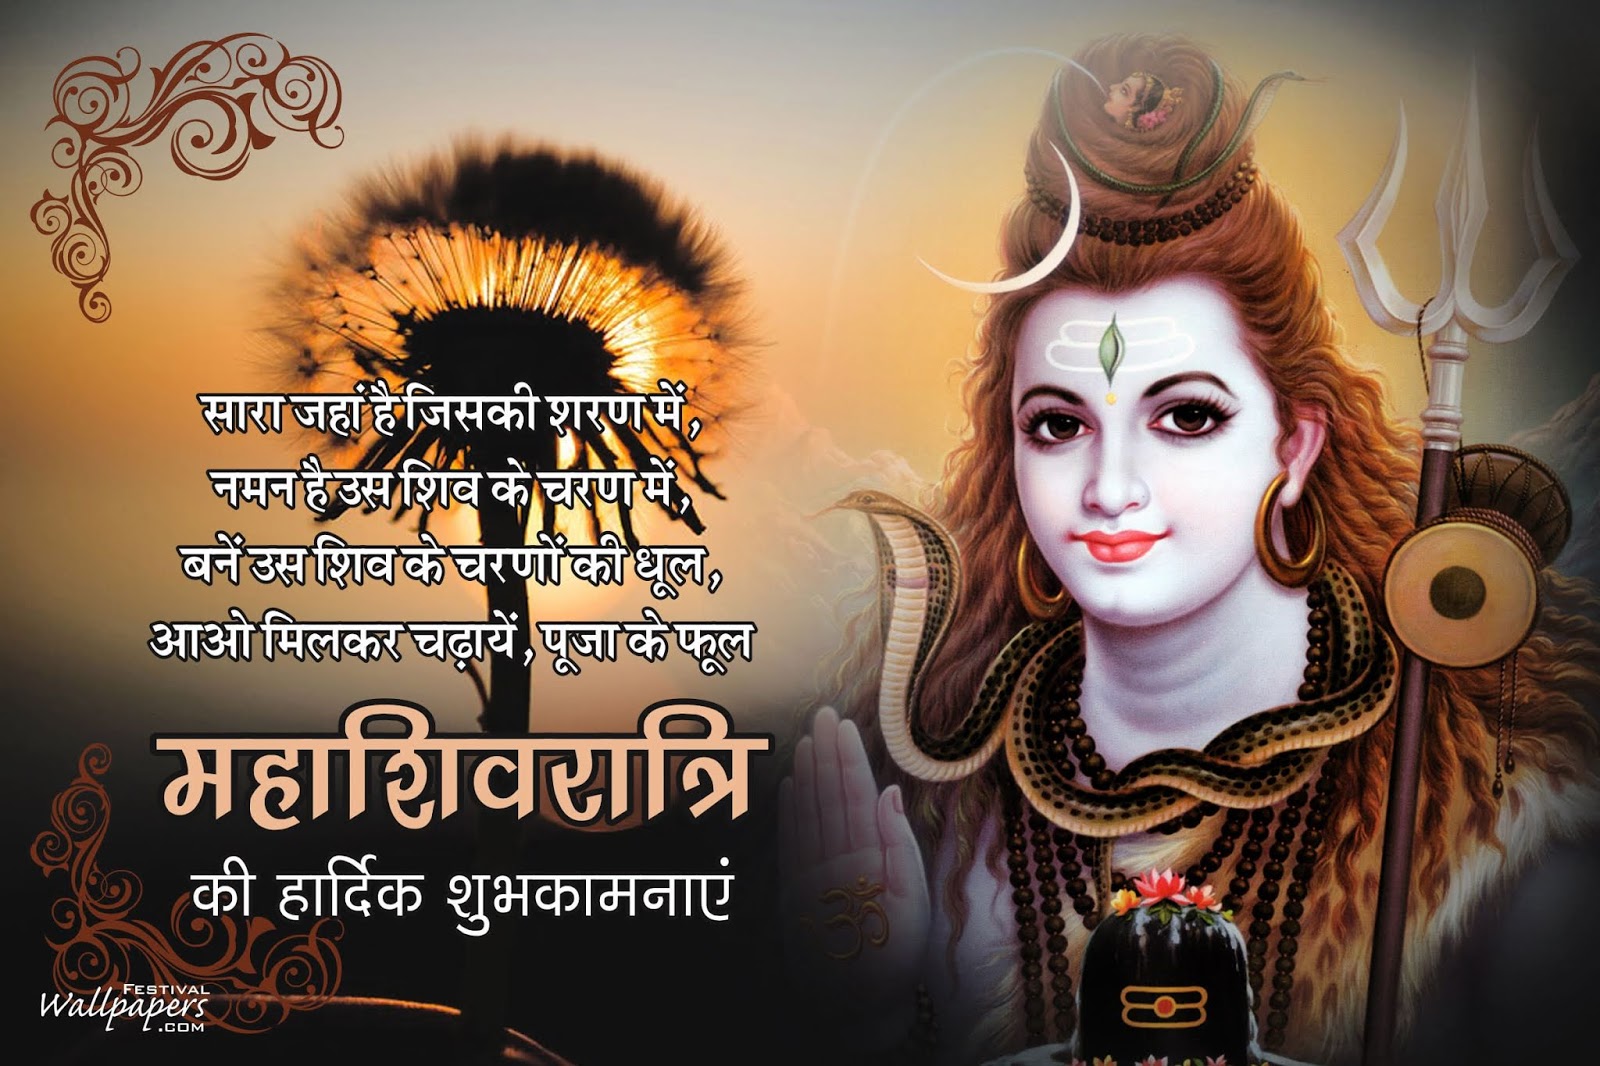 15 Best Maha Shivratri Wishes Images And Wallpapers - Best Wishes For Mahashivratri , HD Wallpaper & Backgrounds